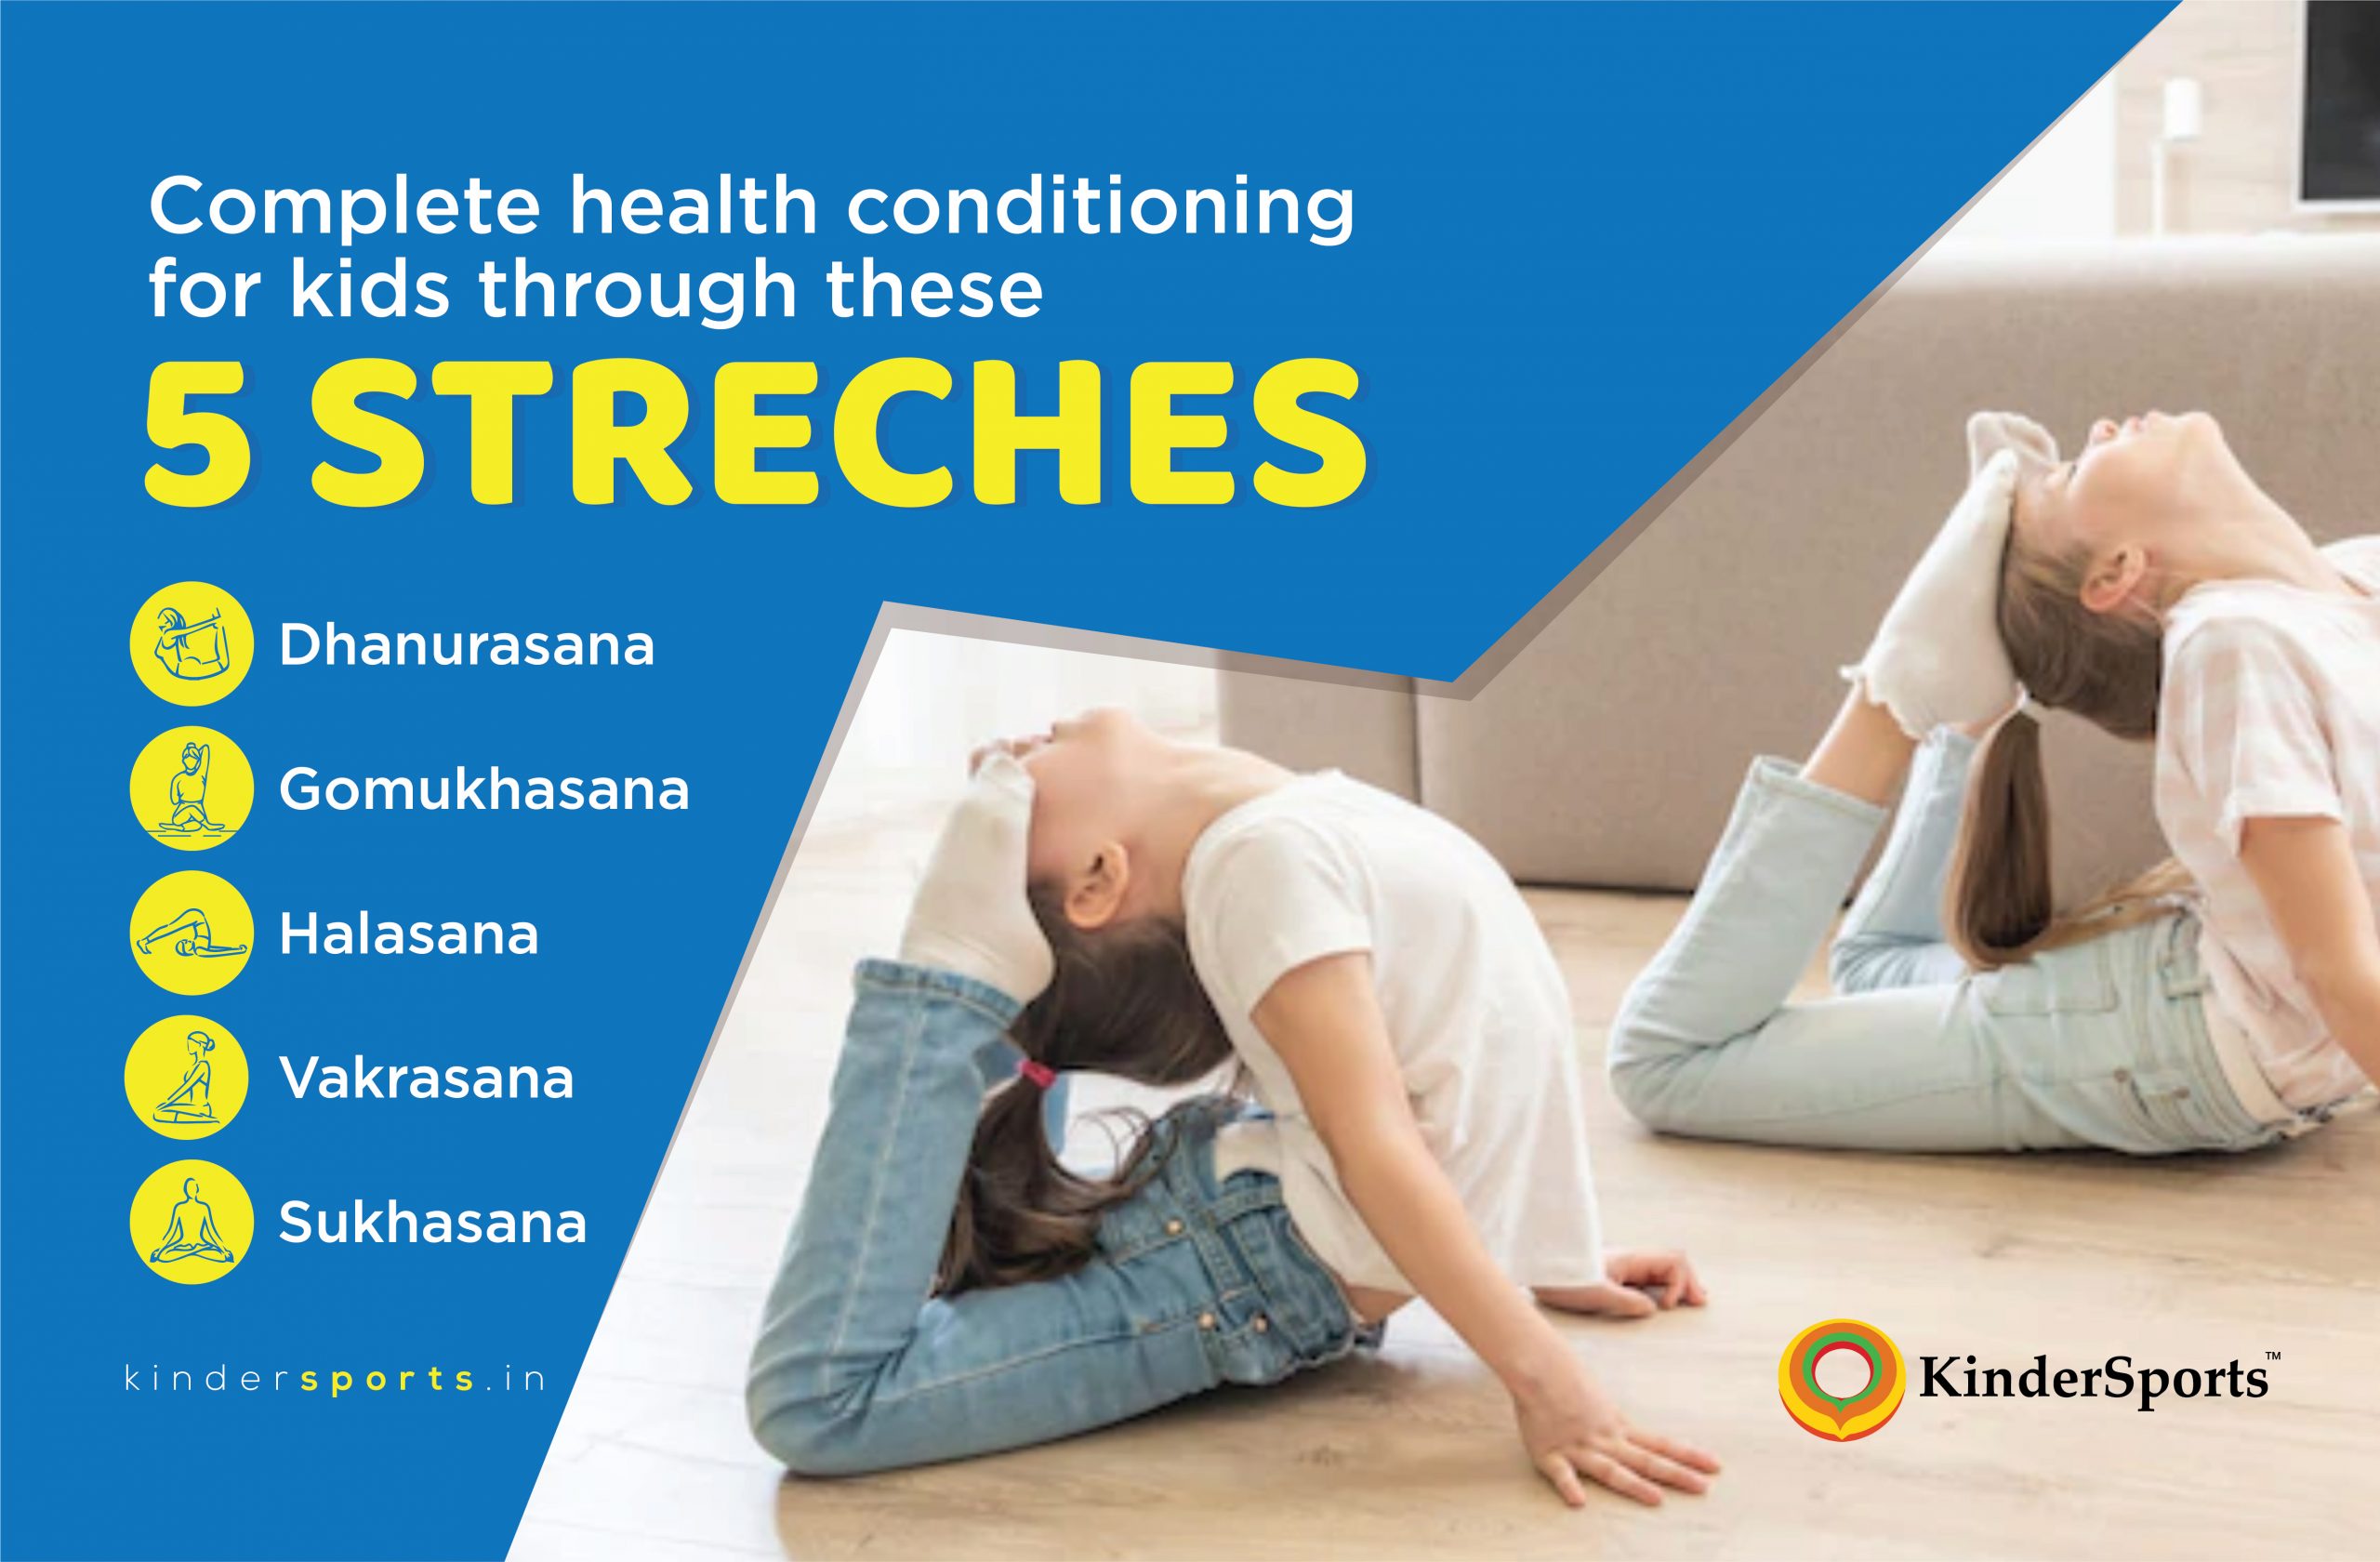 5 stretches for kids for better health conditioning.